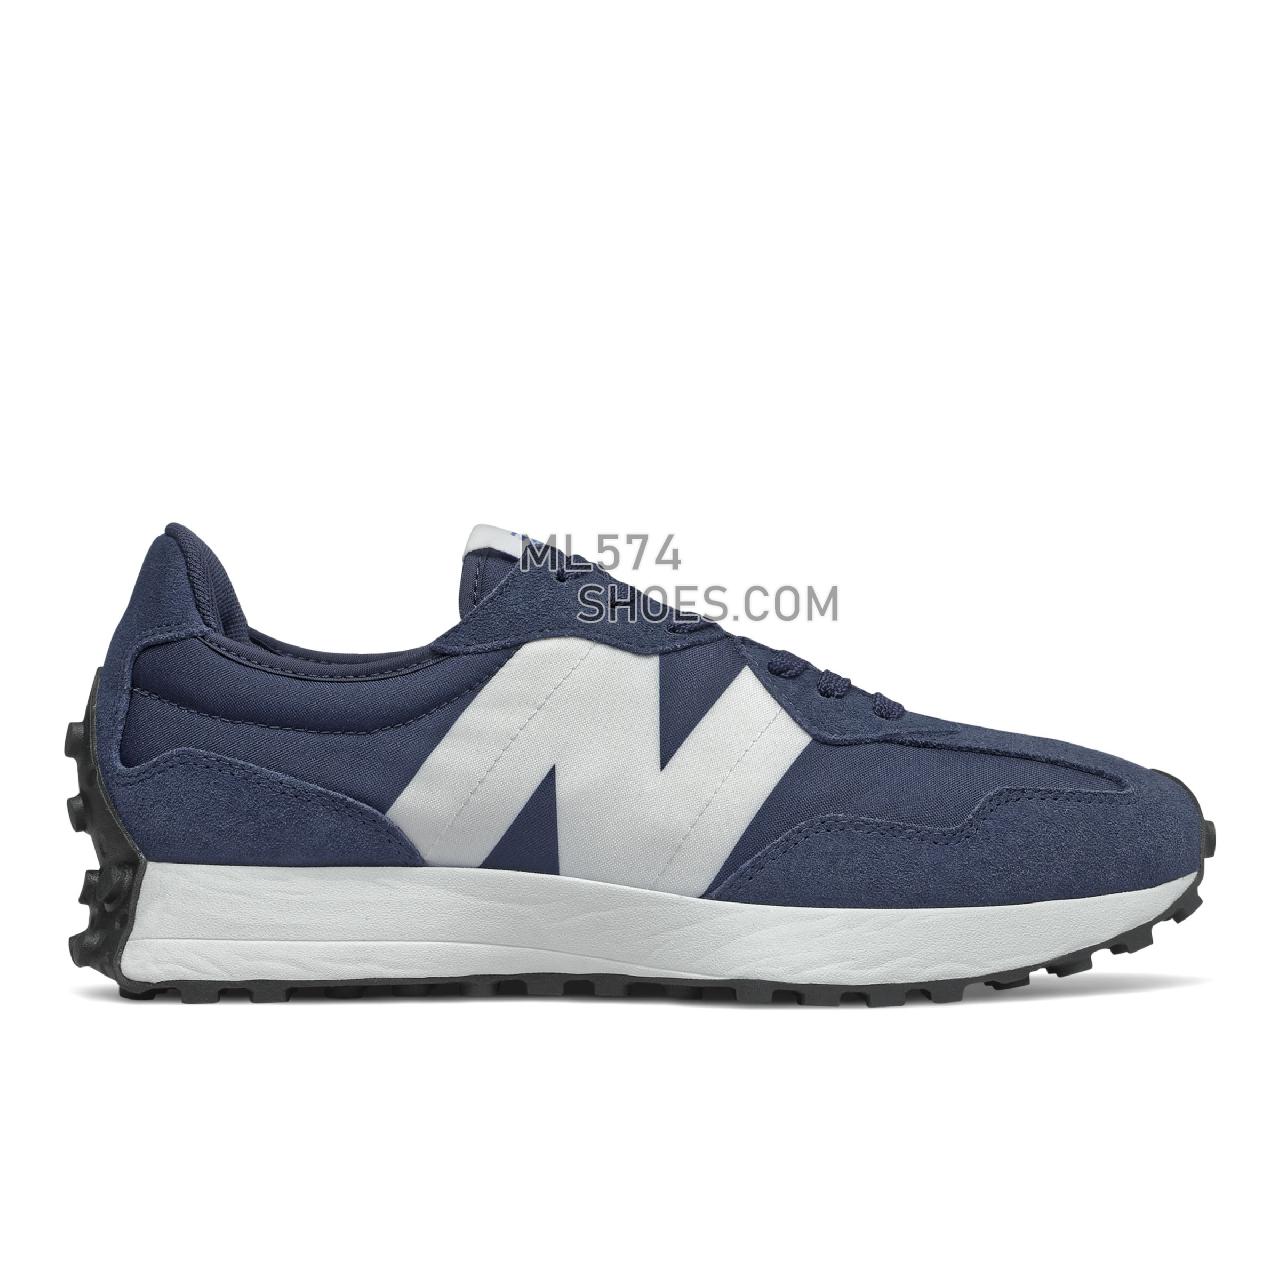 New Balance 327 - Unisex Men's Women's Sport Style Sneakers - Natural Indigo with White - MS327CPD